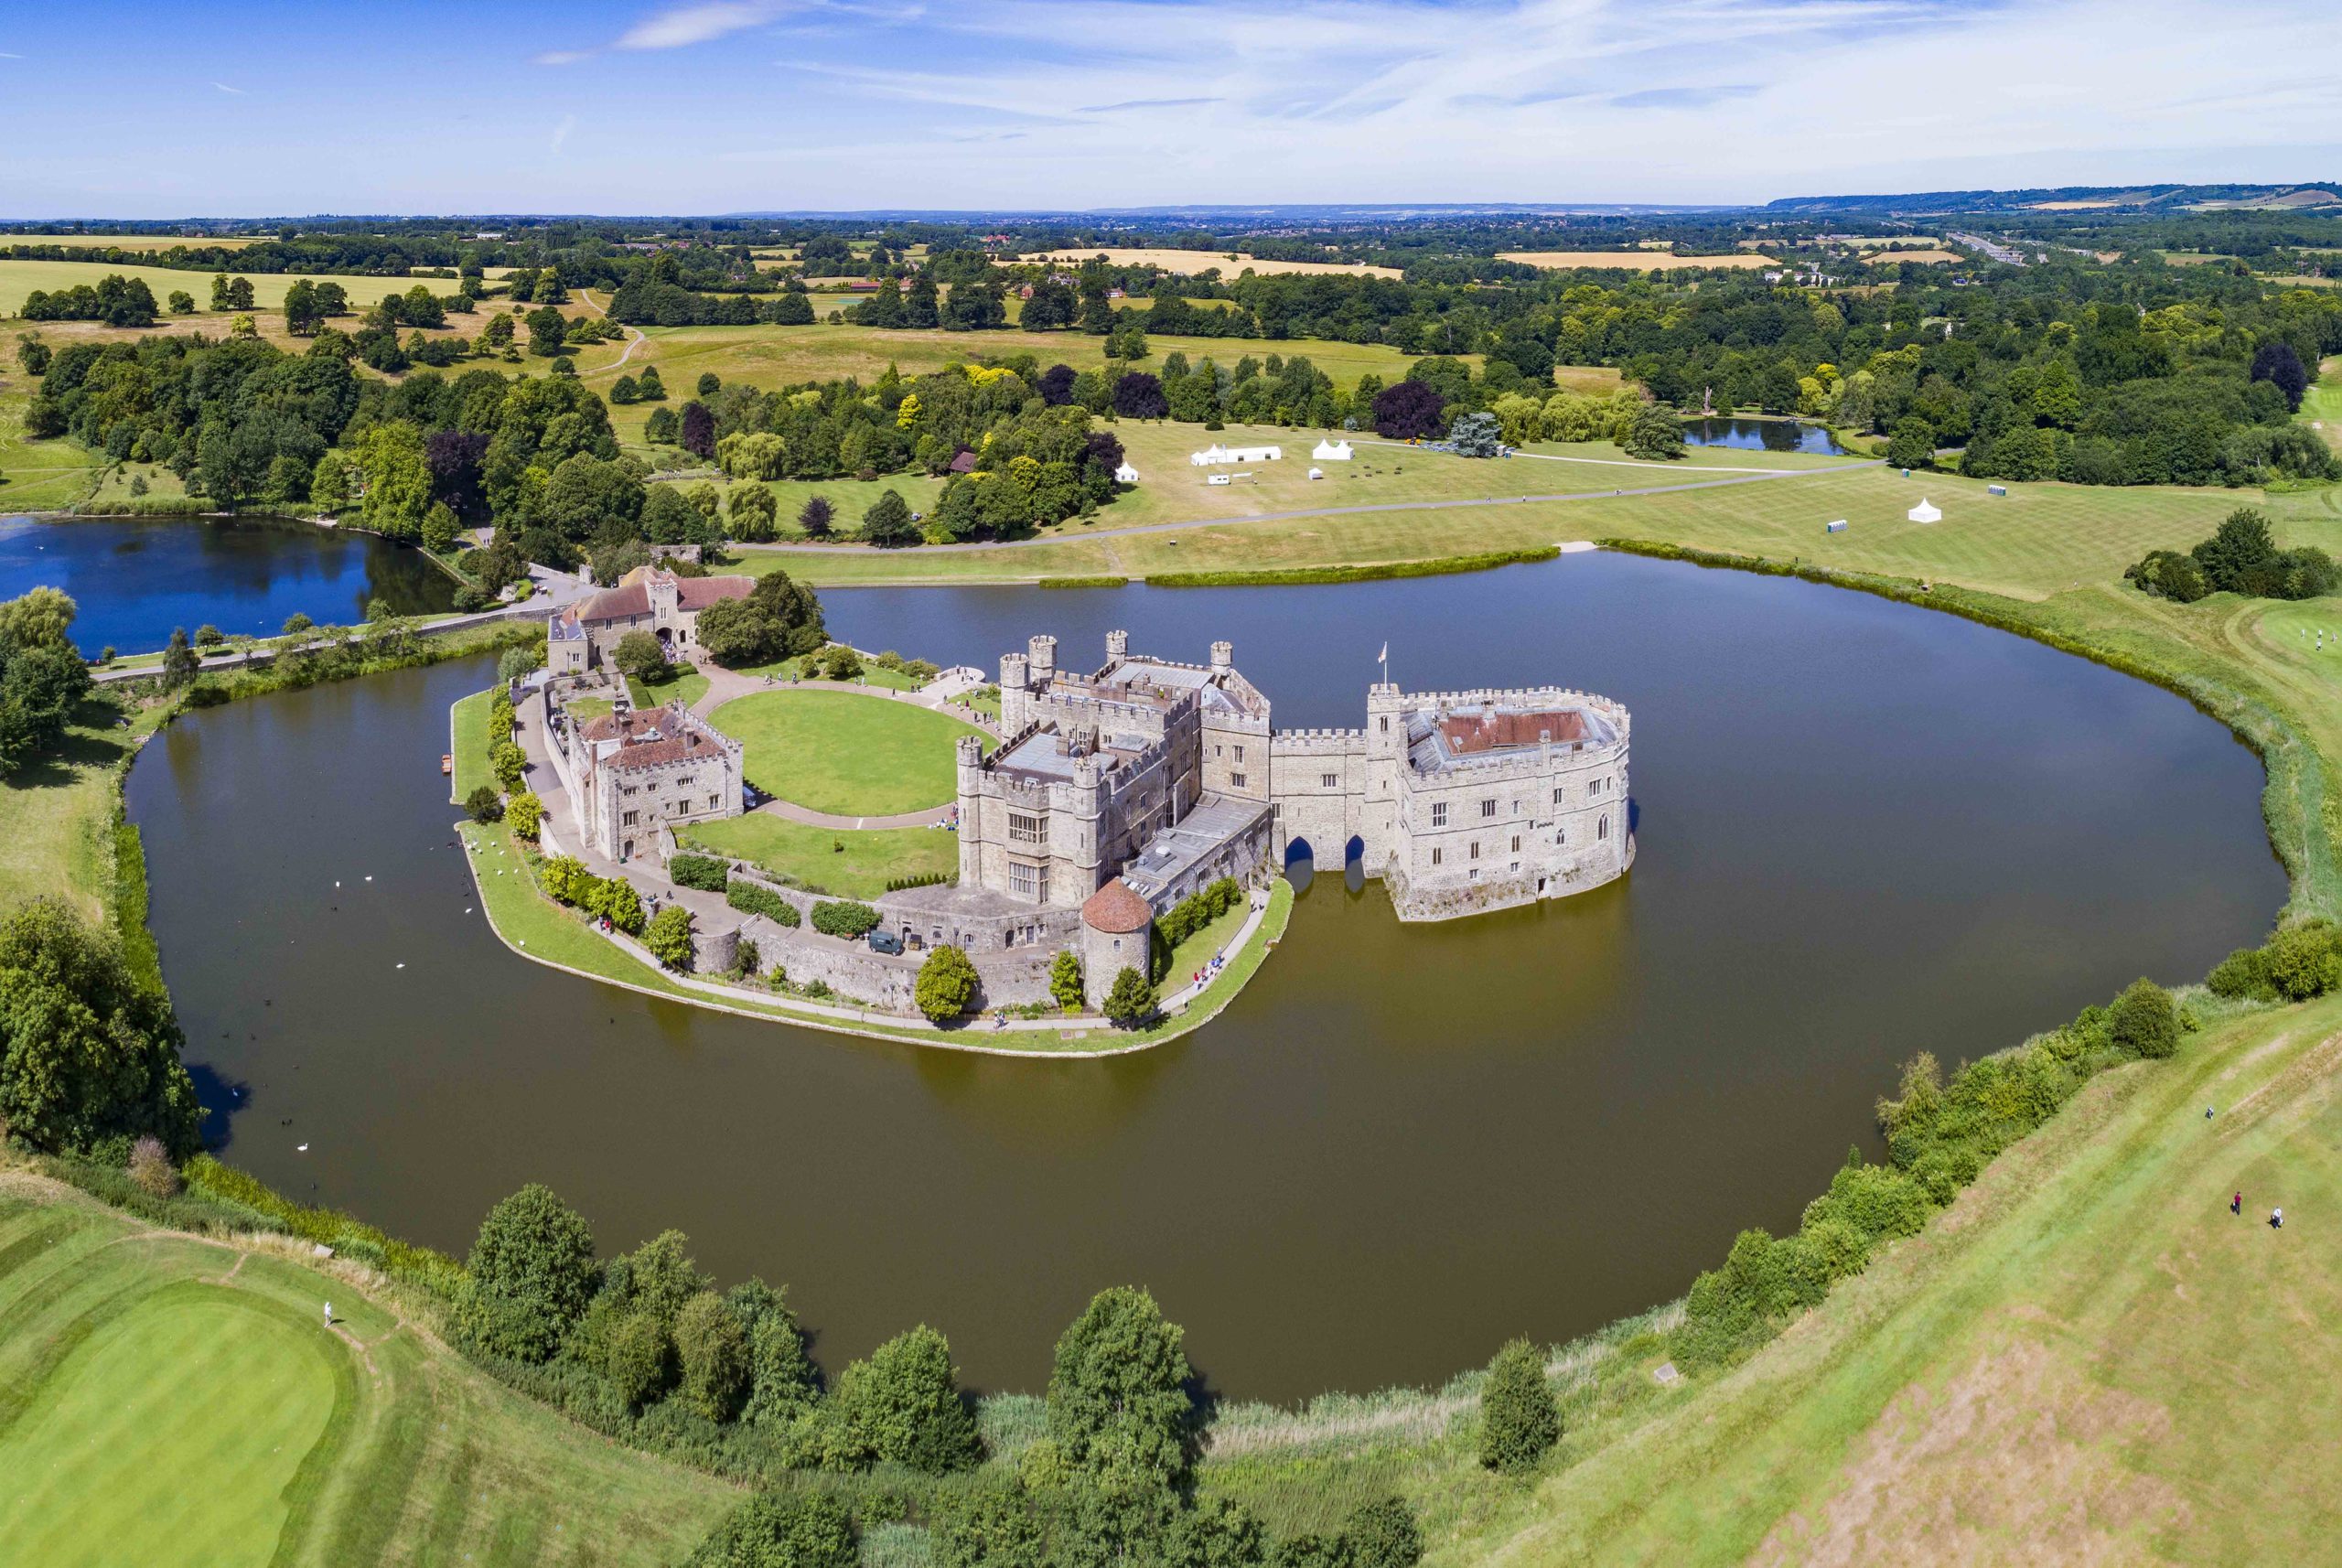 Leeds Castle © Chensiyuan - licence [CC BY-SA 4.0] from Wikimedia Commons